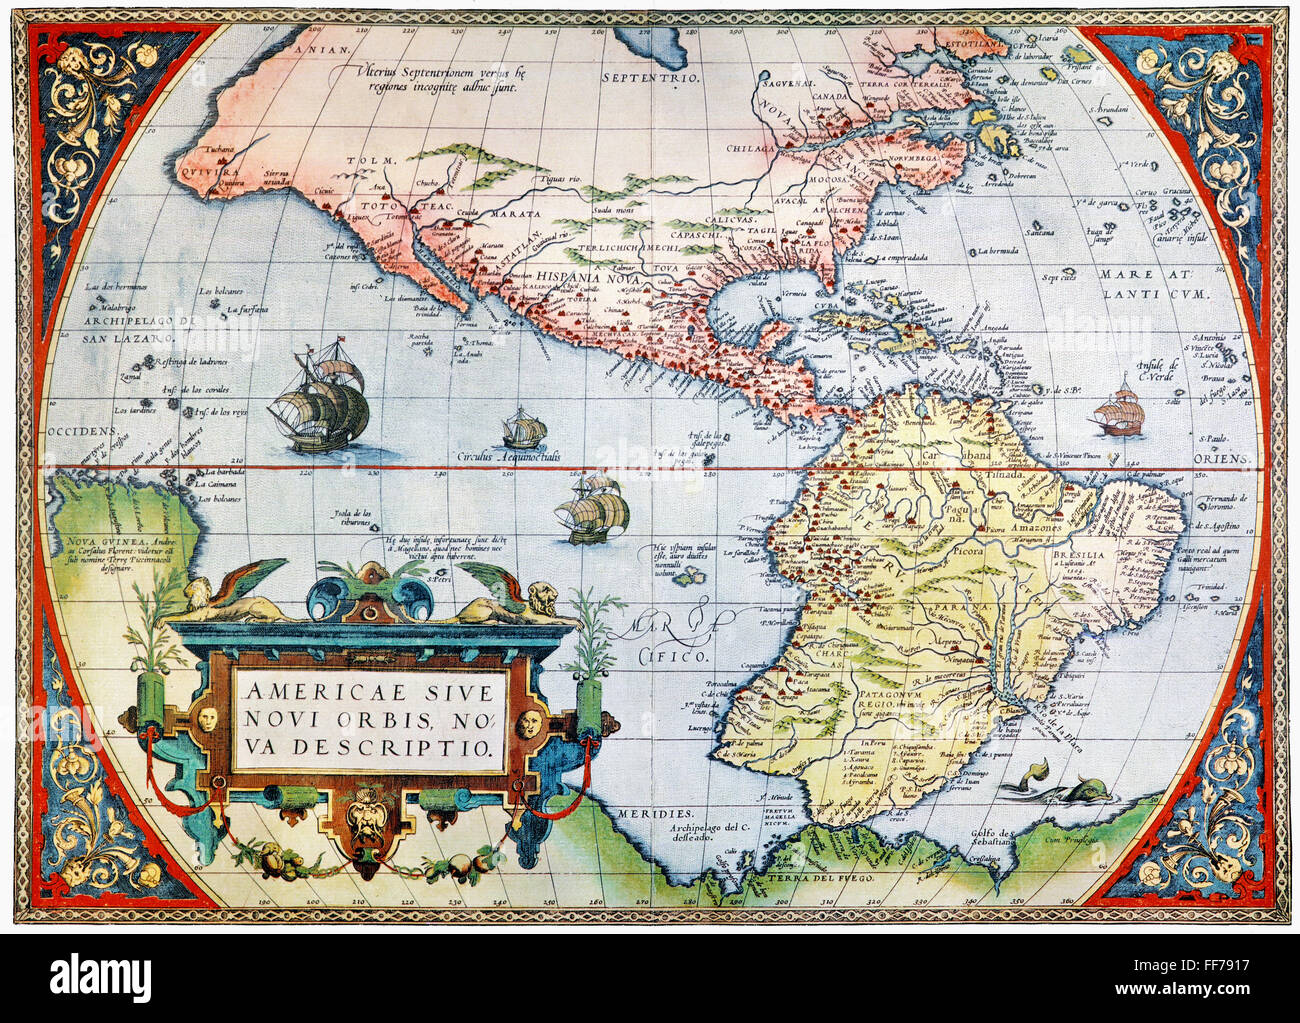 NEW WORLD MAP, 1570. /n'A New Description of America, or the New World.' Map from Abraham Ortelius' 'Theatrum Orbis Terrarum,' 1570. Stock Photo